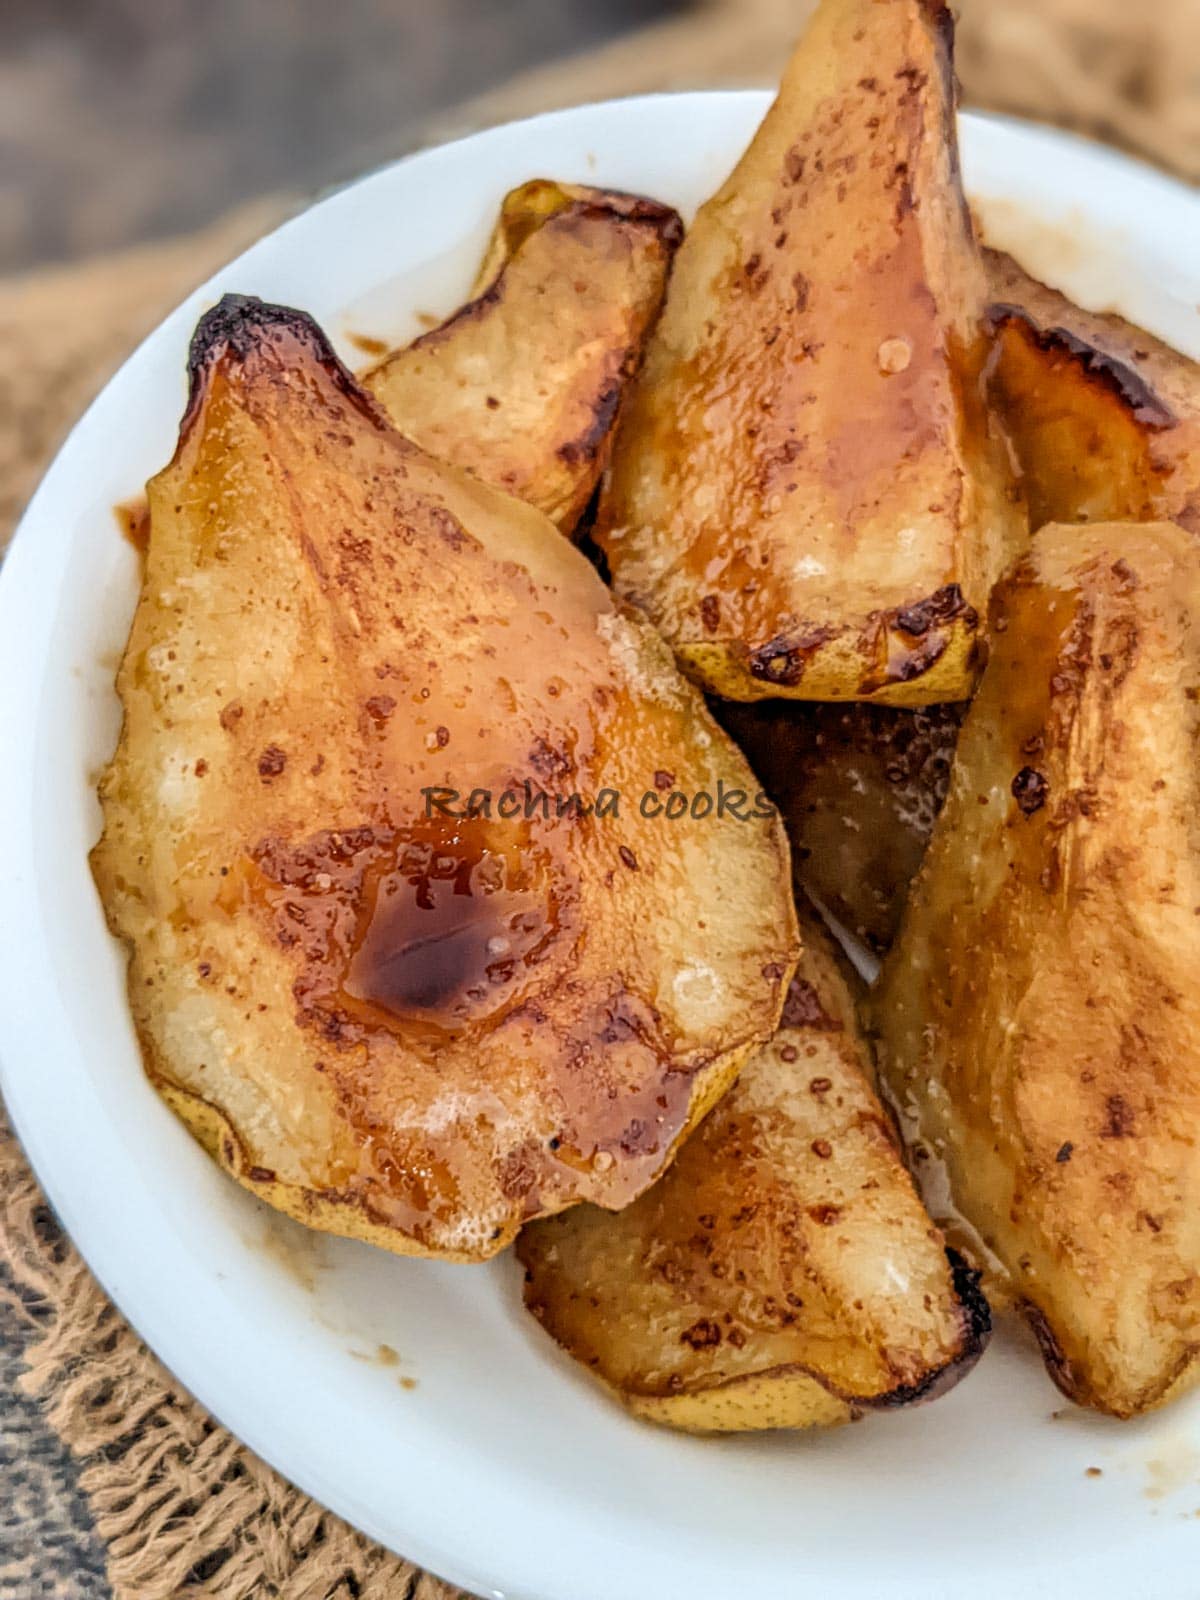 Caramelised air fryer pears on a white plate.